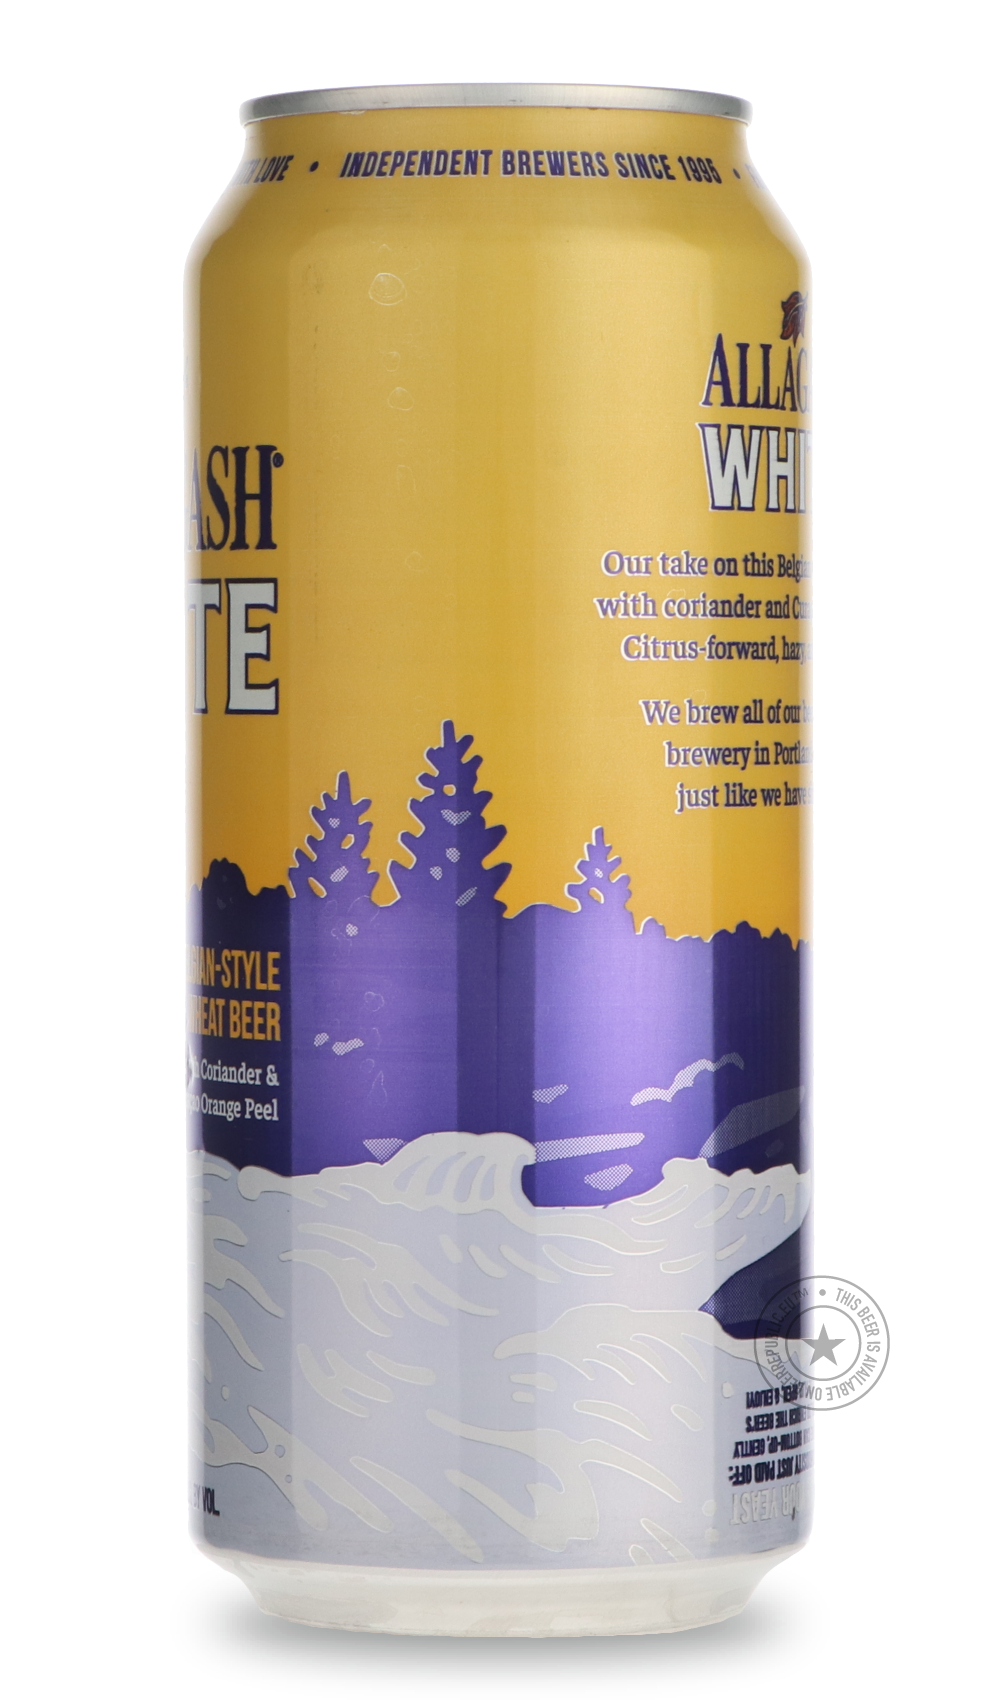 -Allagash- White [473ml can]-Pale- Only @ Beer Republic - The best online beer store for American & Canadian craft beer - Buy beer online from the USA and Canada - Bier online kopen - Amerikaans bier kopen - Craft beer store - Craft beer kopen - Amerikanisch bier kaufen - Bier online kaufen - Acheter biere online - IPA - Stout - Porter - New England IPA - Hazy IPA - Imperial Stout - Barrel Aged - Barrel Aged Imperial Stout - Brown - Dark beer - Blond - Blonde - Pilsner - Lager - Wheat - Weizen - Amber - Bar